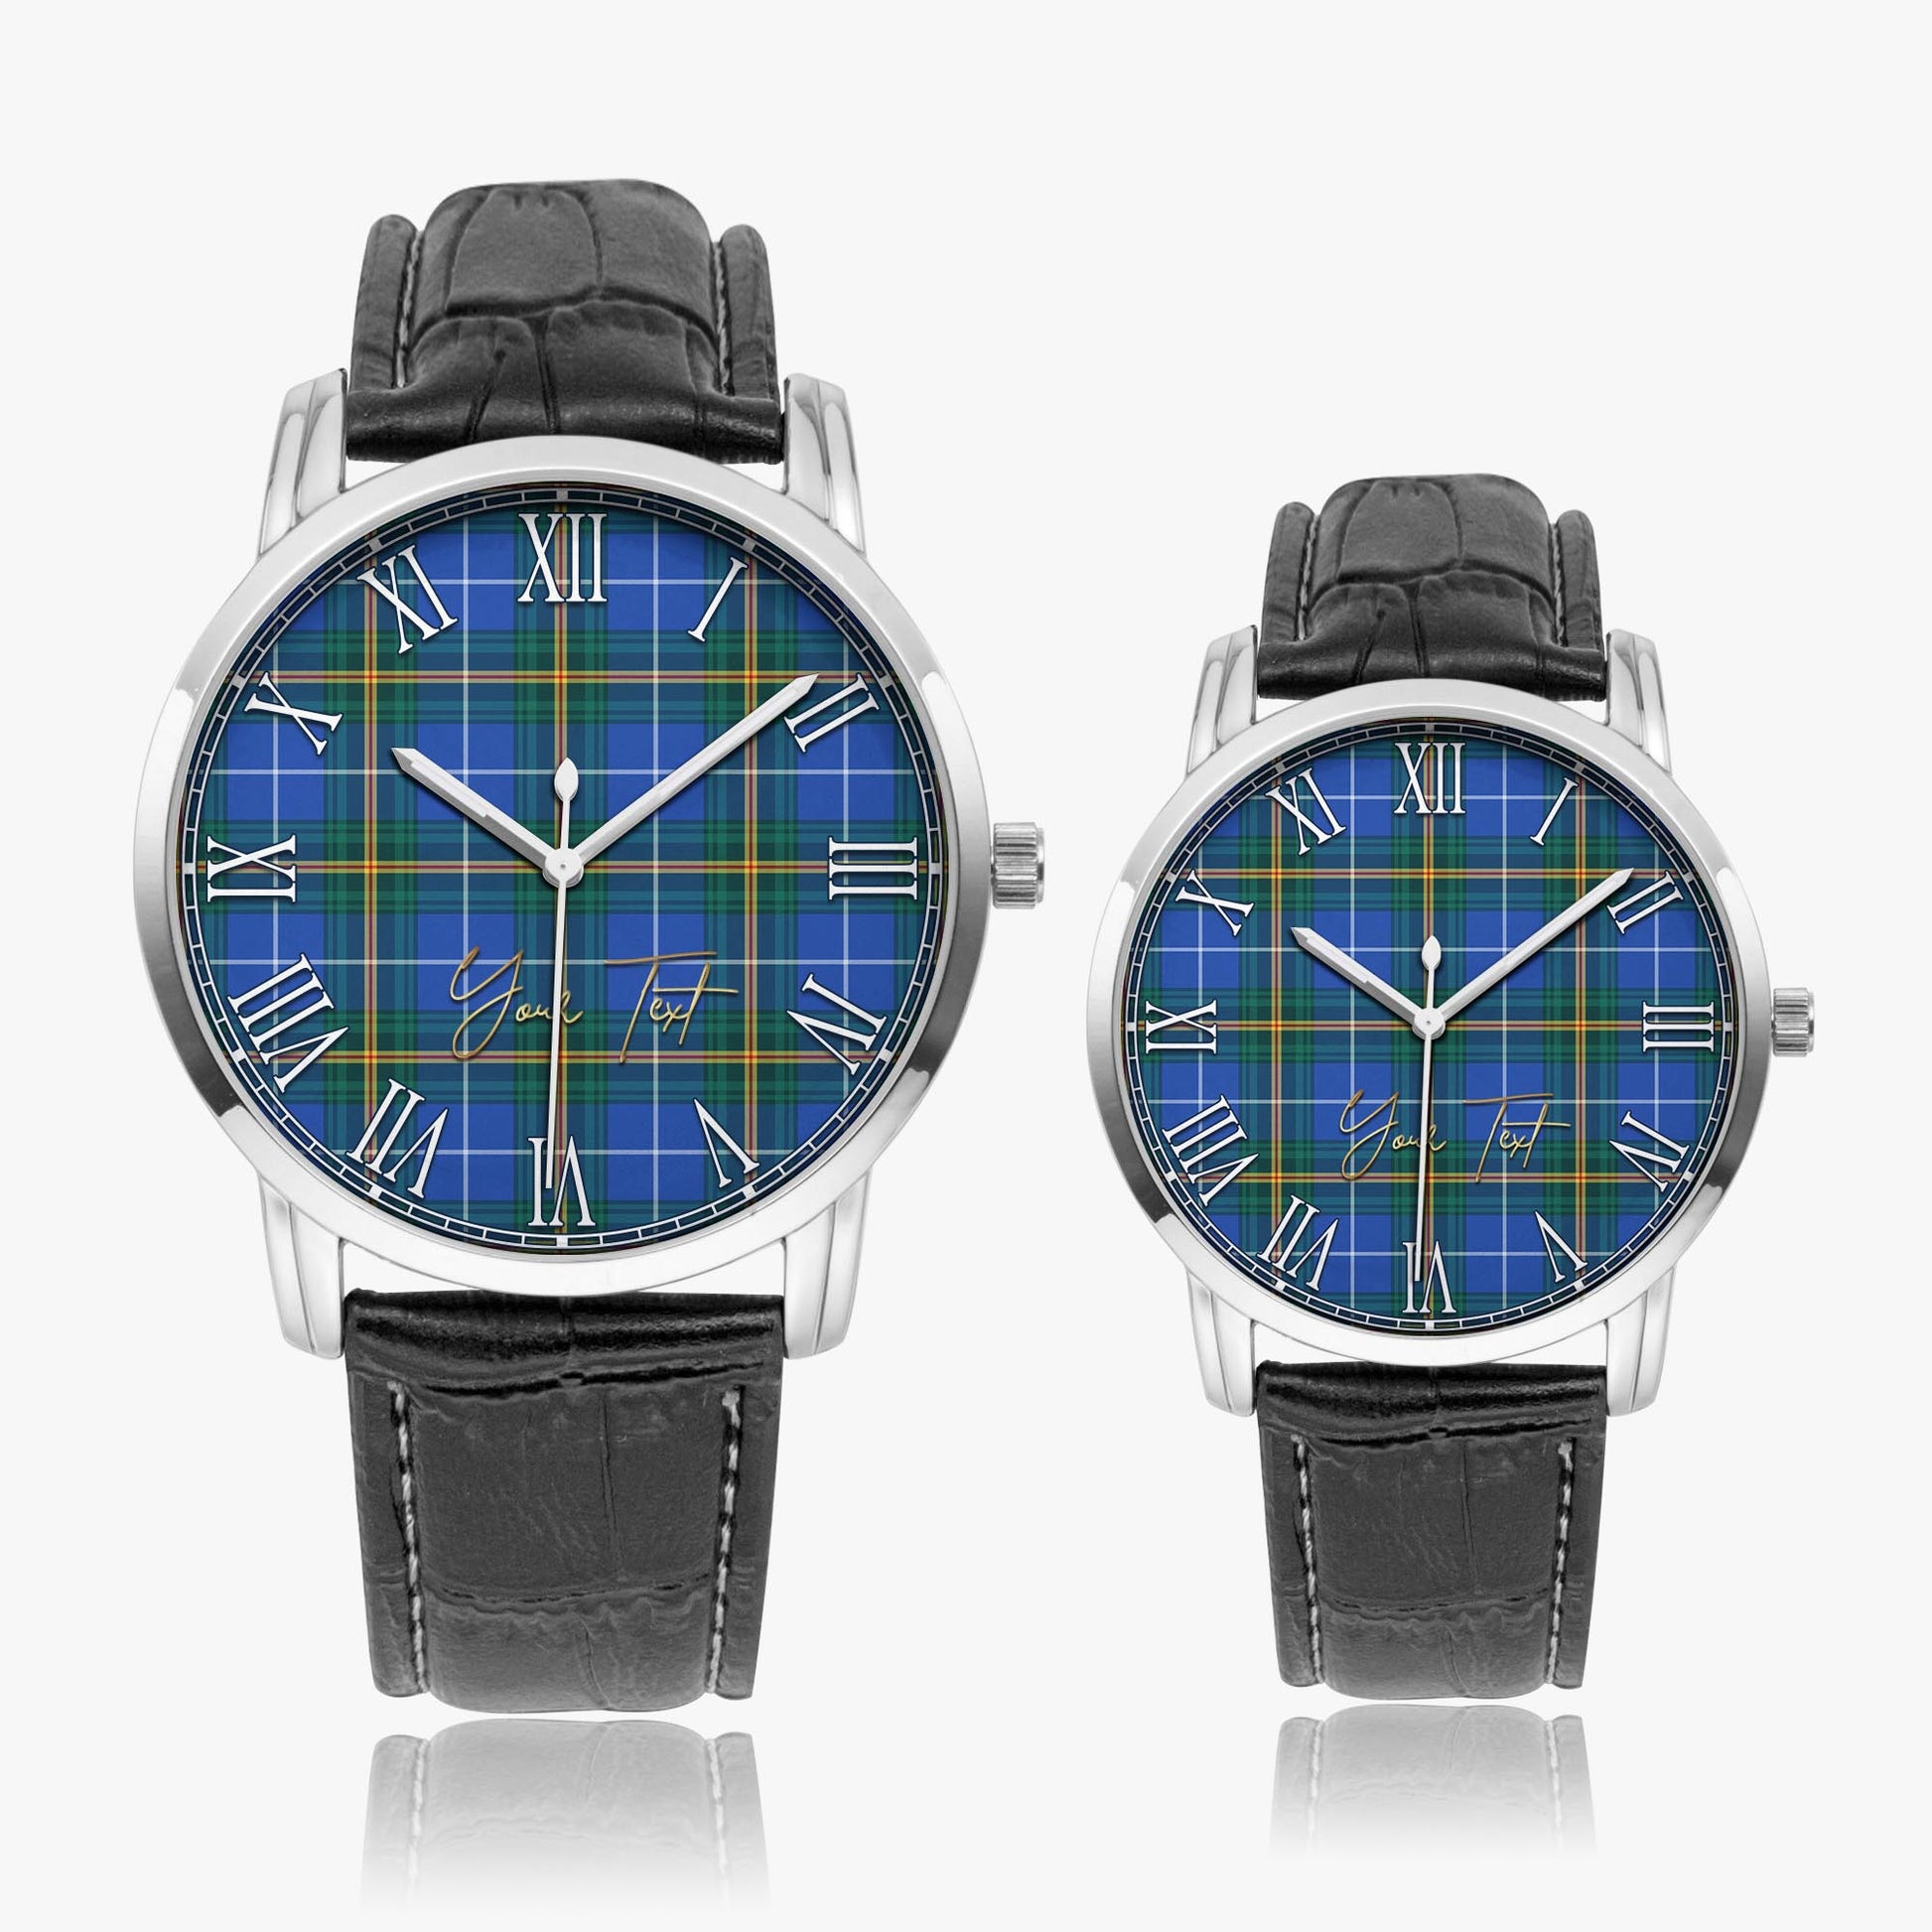 Nova Scotia Province Canada Tartan Personalized Your Text Leather Trap Quartz Watch Wide Type Silver Case With Black Leather Strap - Tartanvibesclothing